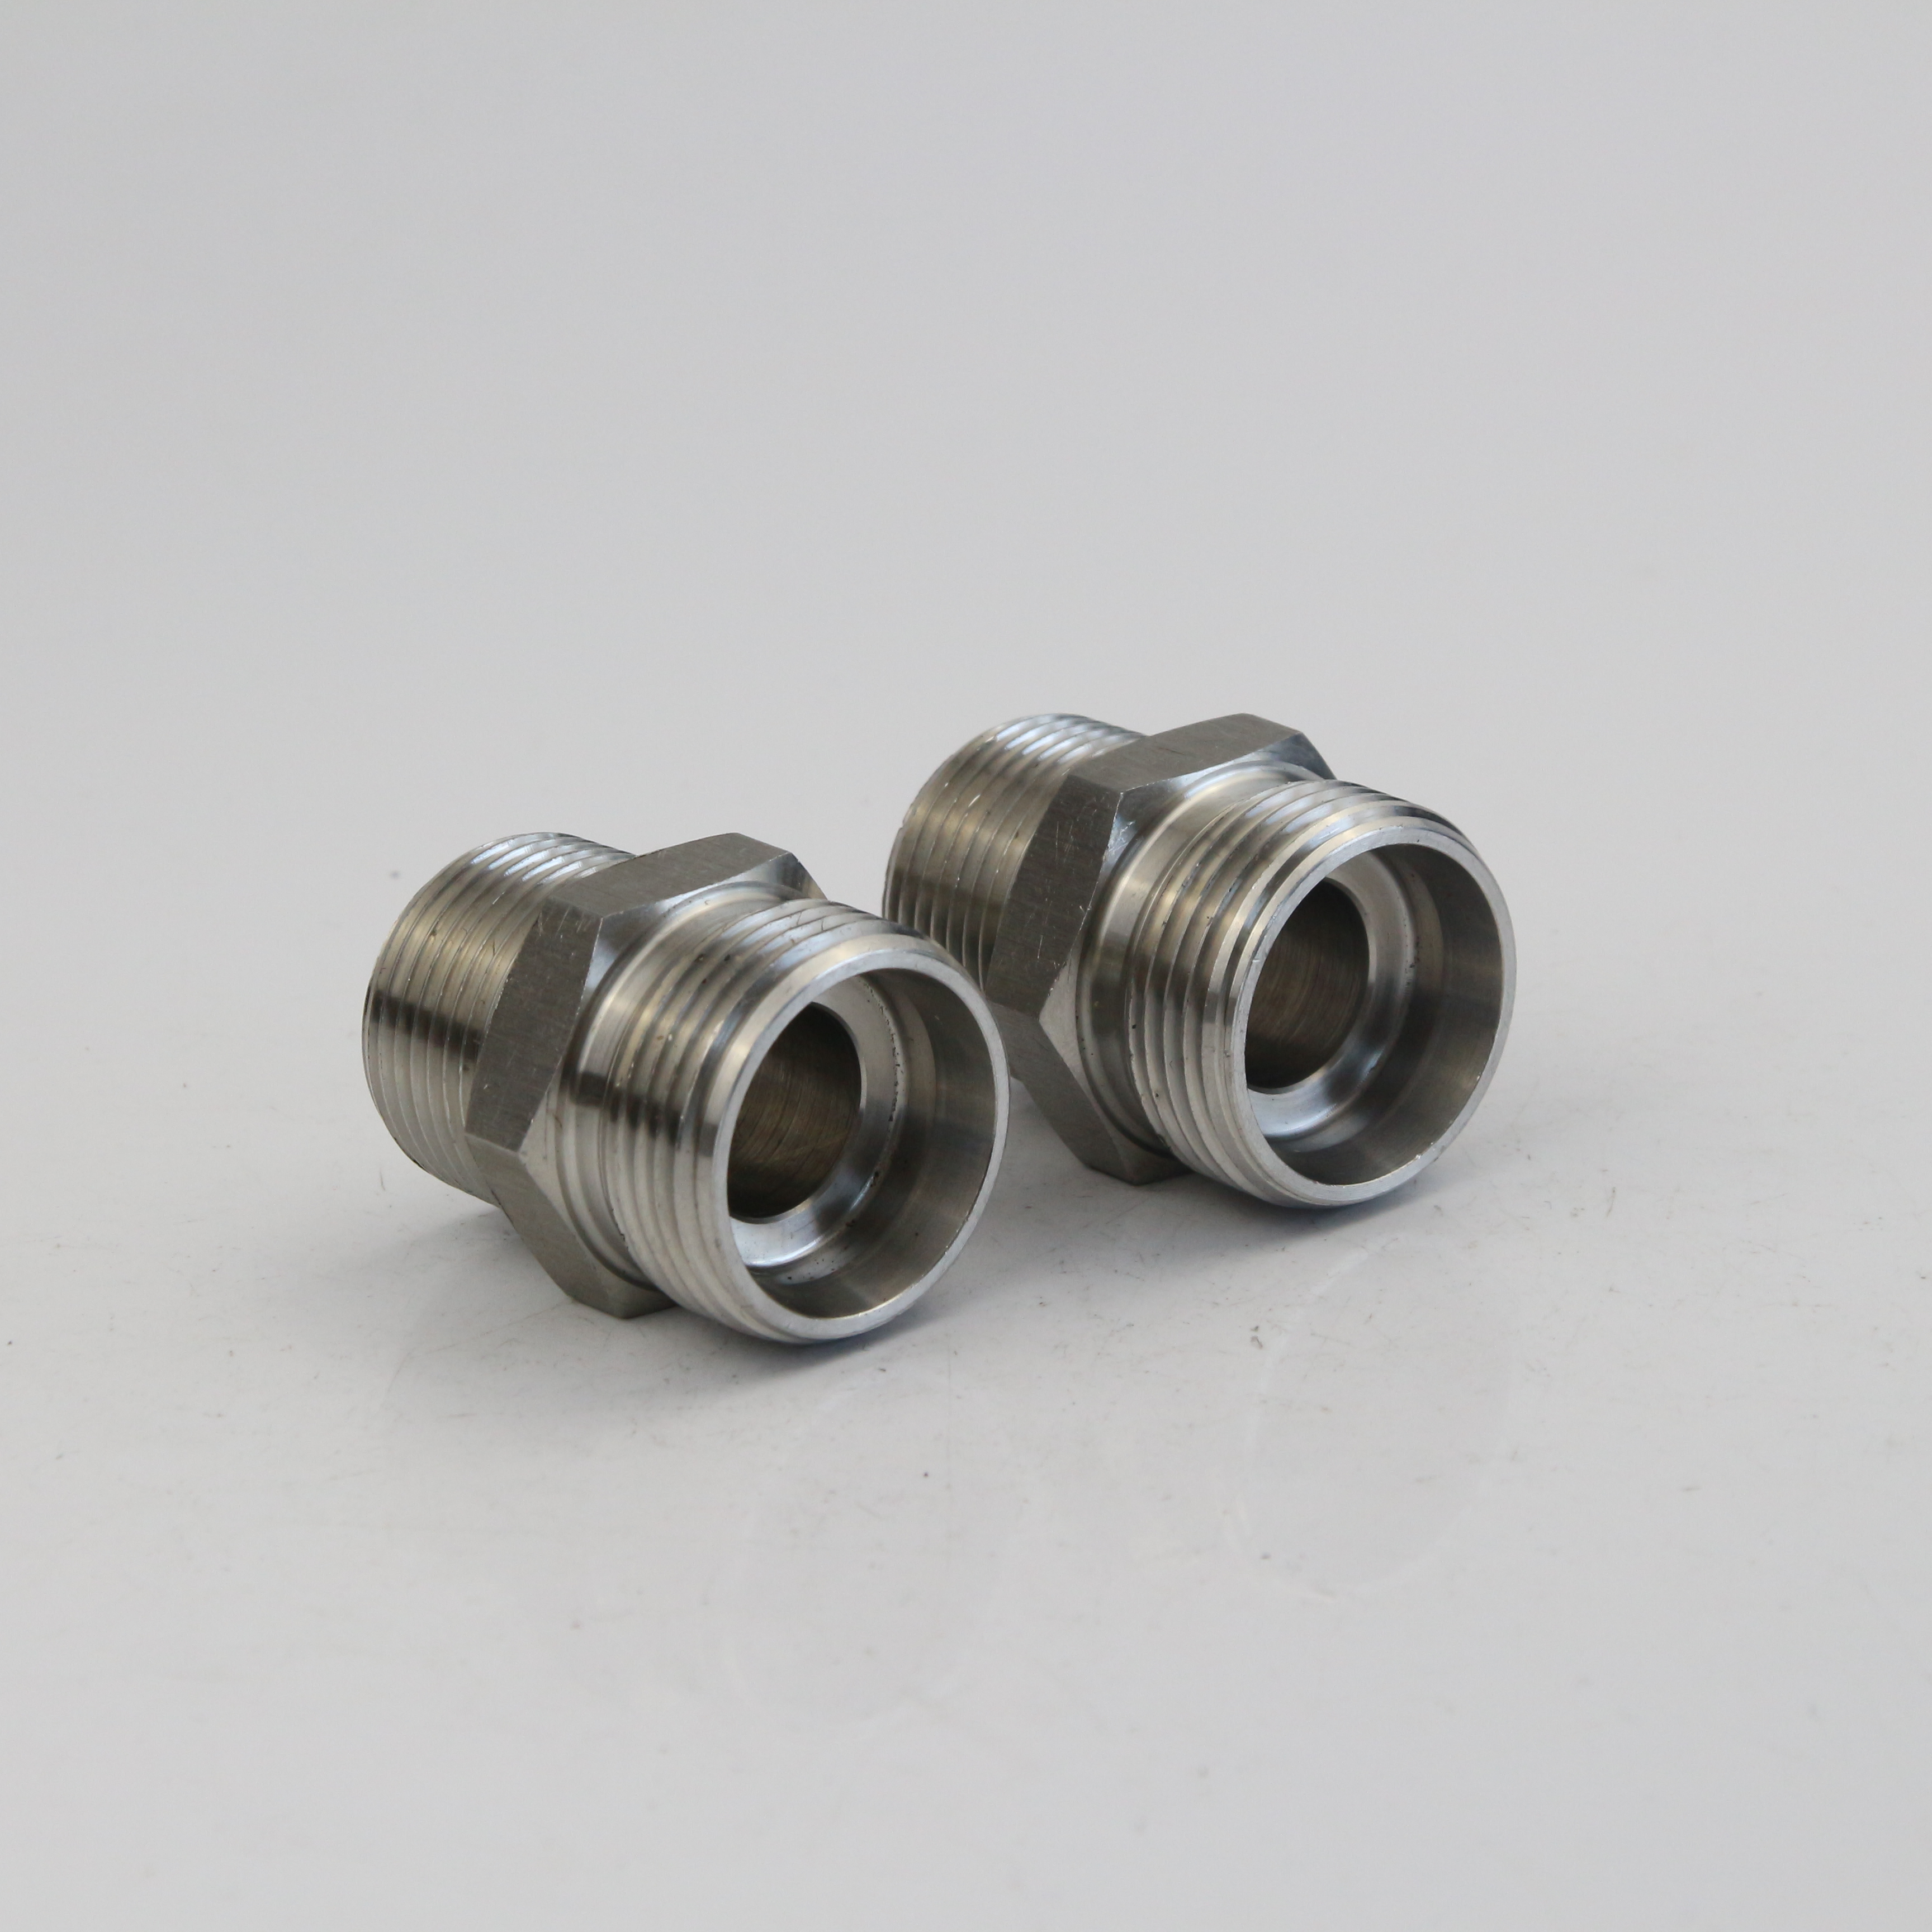 BSPT to Metric Male O-ring Adaptor 1ET